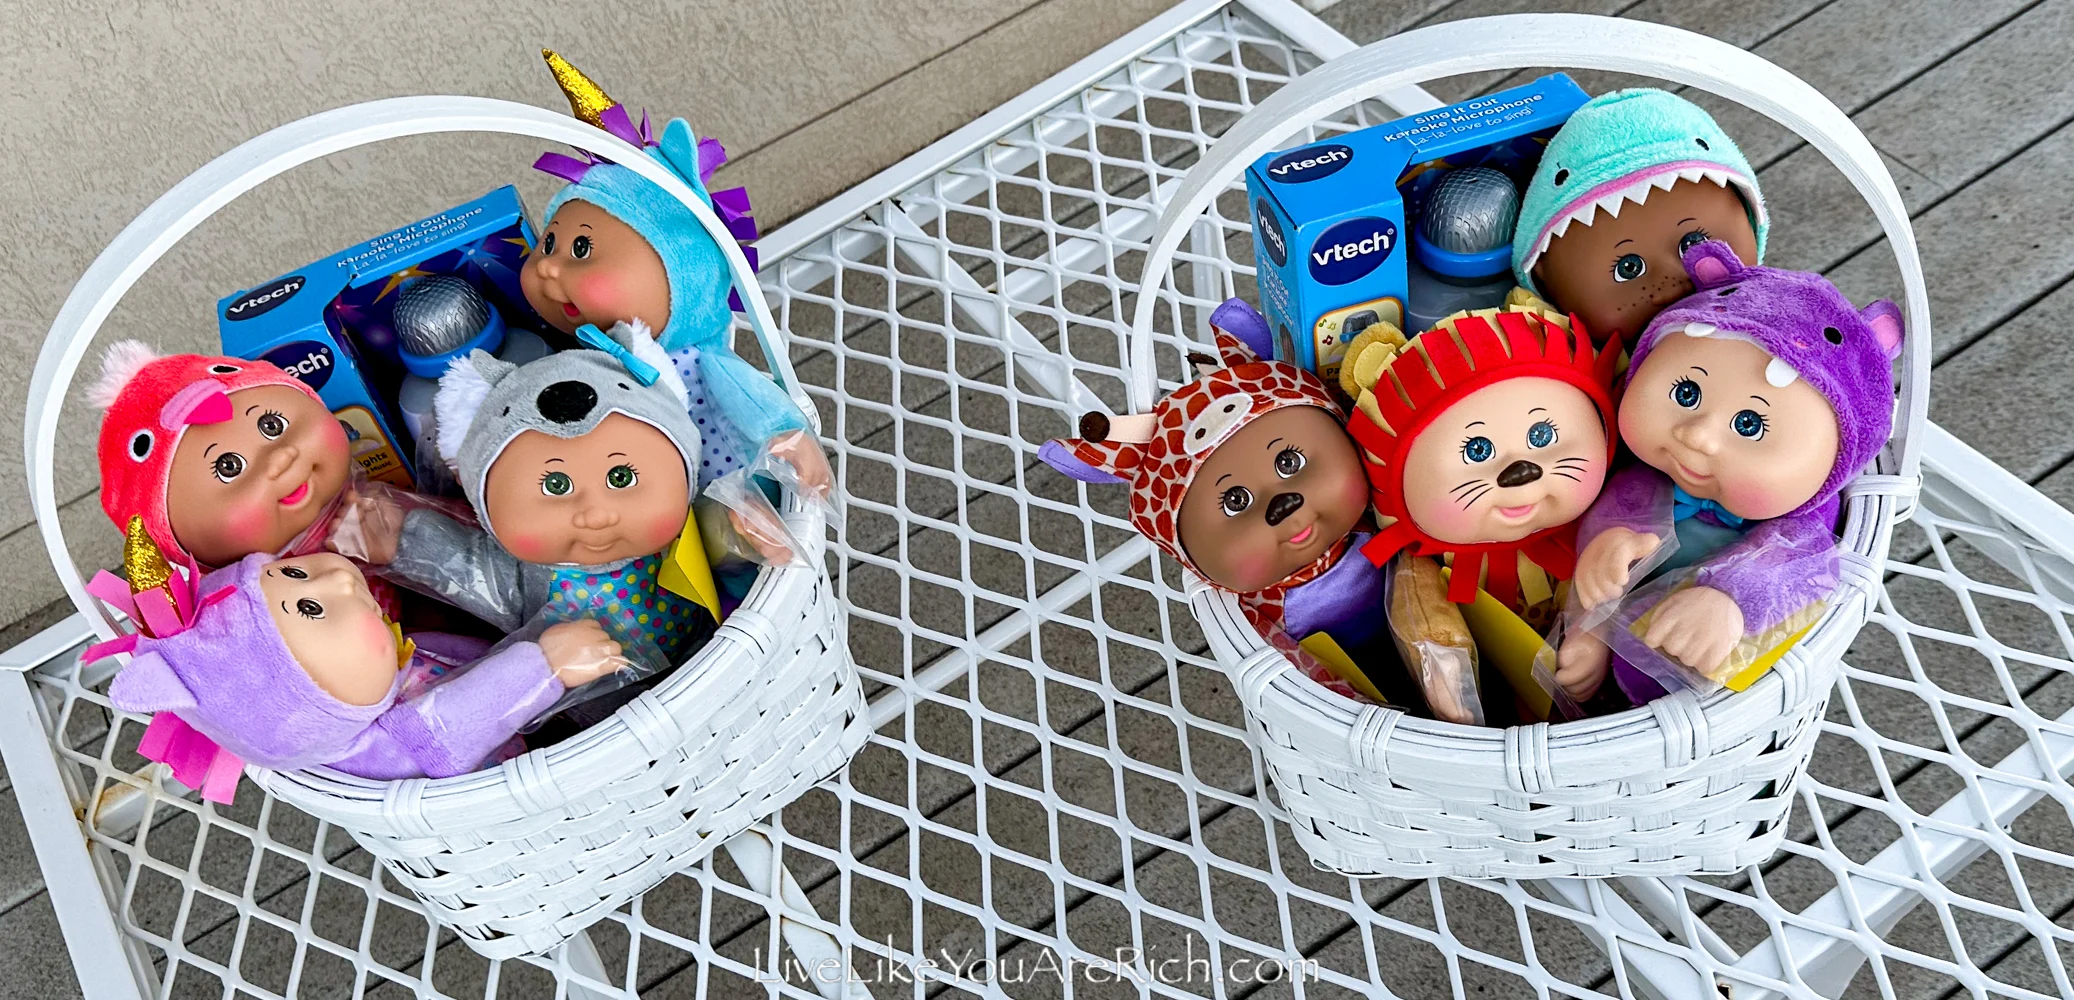 Candy Free Toddler Easter Baskets